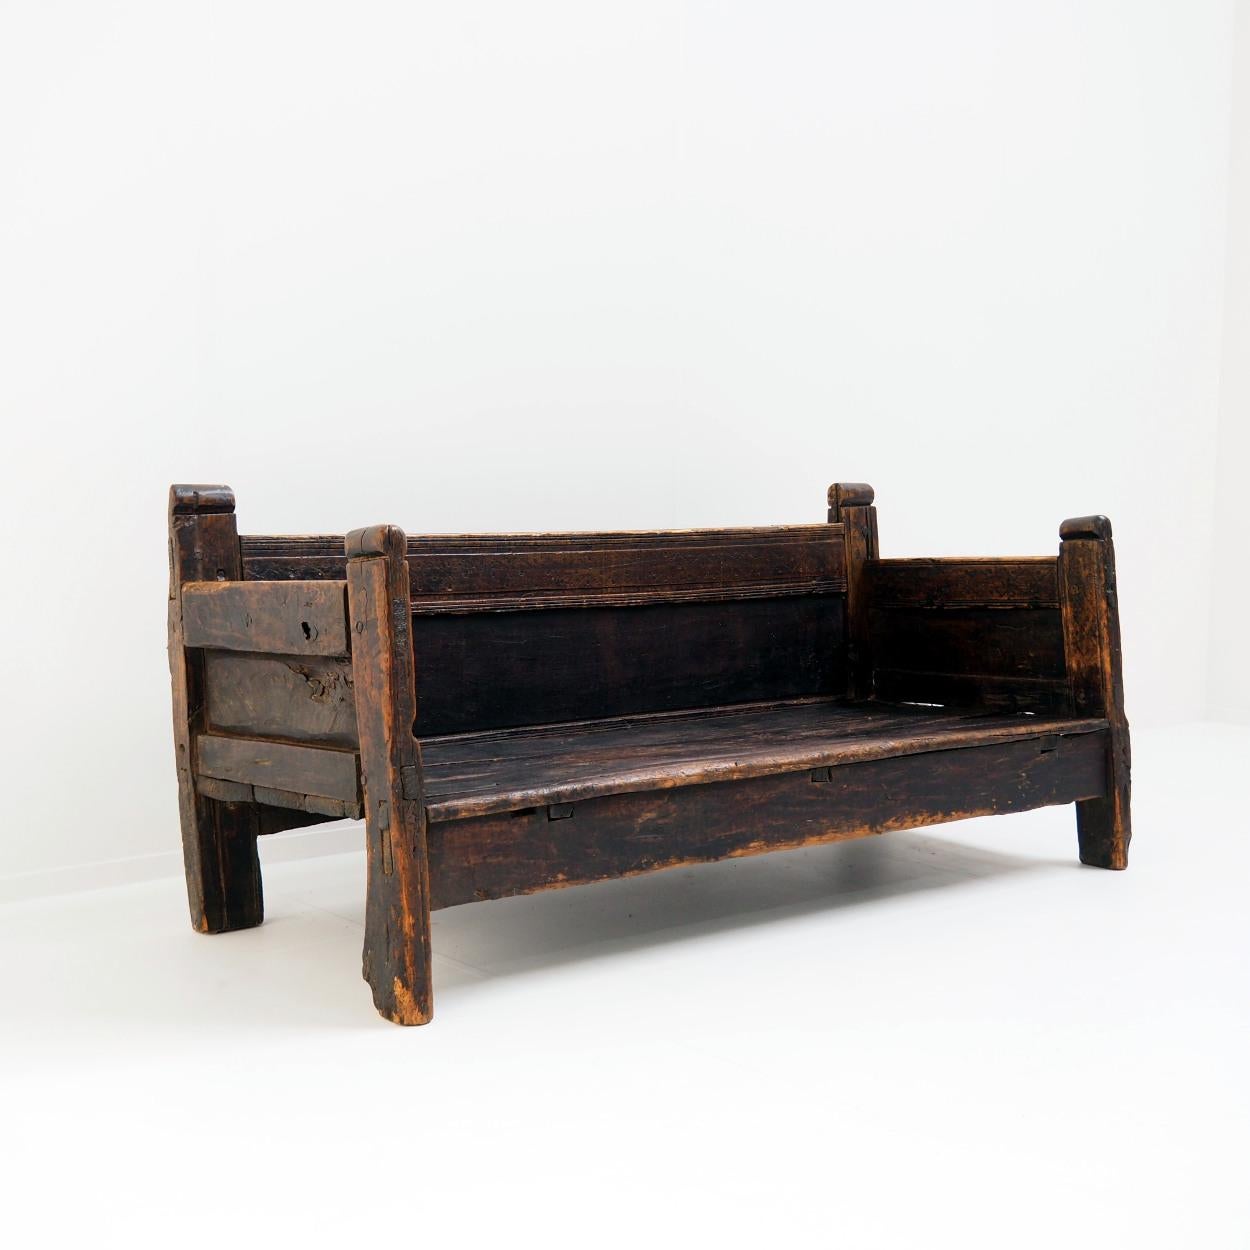 Beautiful 18th century wooden bench with many signs of wear, and decorated with primitive and rural wood carvings. The colour is a very dark brown (stained) that has acquired a beautiful patina.

Please note that the seat is quite low and deep and